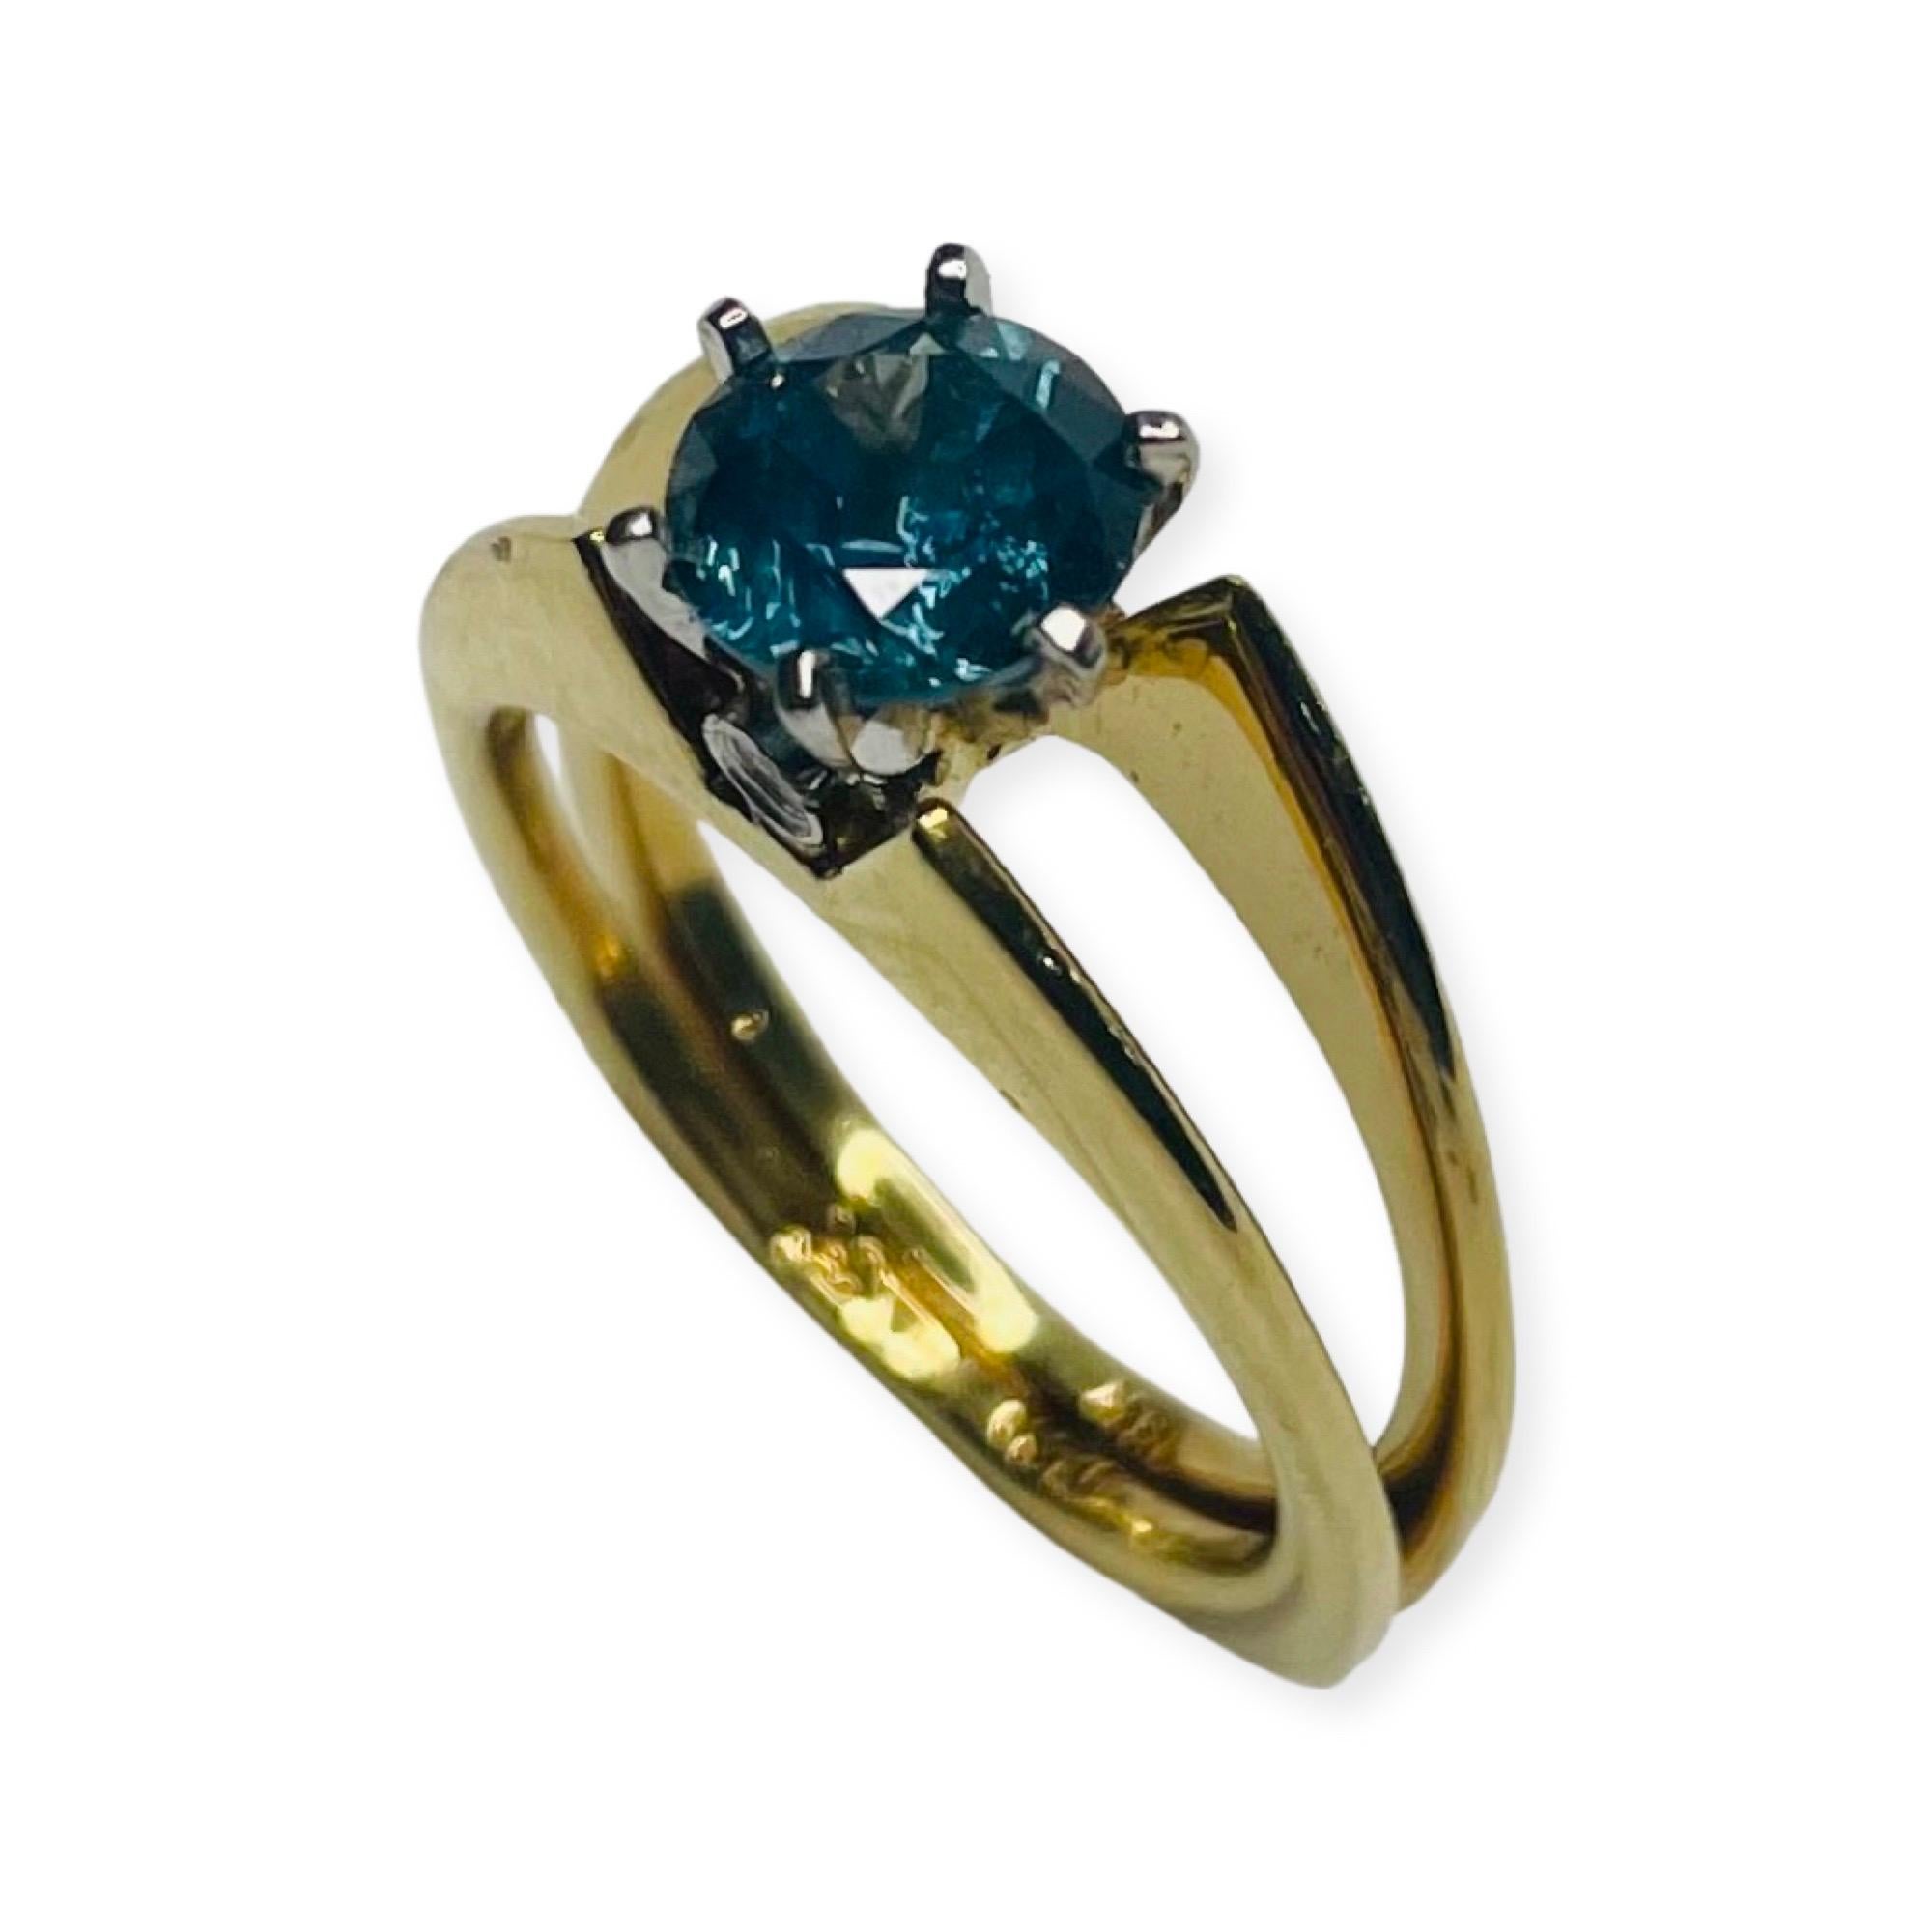 Lithos 18K Yellow Gold, Platinum, Montana Sapphire Ring.  The center stone is a 1.34 carat Montana Sapphire. This sapphire was mined in Philipsburg Montana. There are 2 full cut round brilliant diamonds bezel set one in the front and one in the back